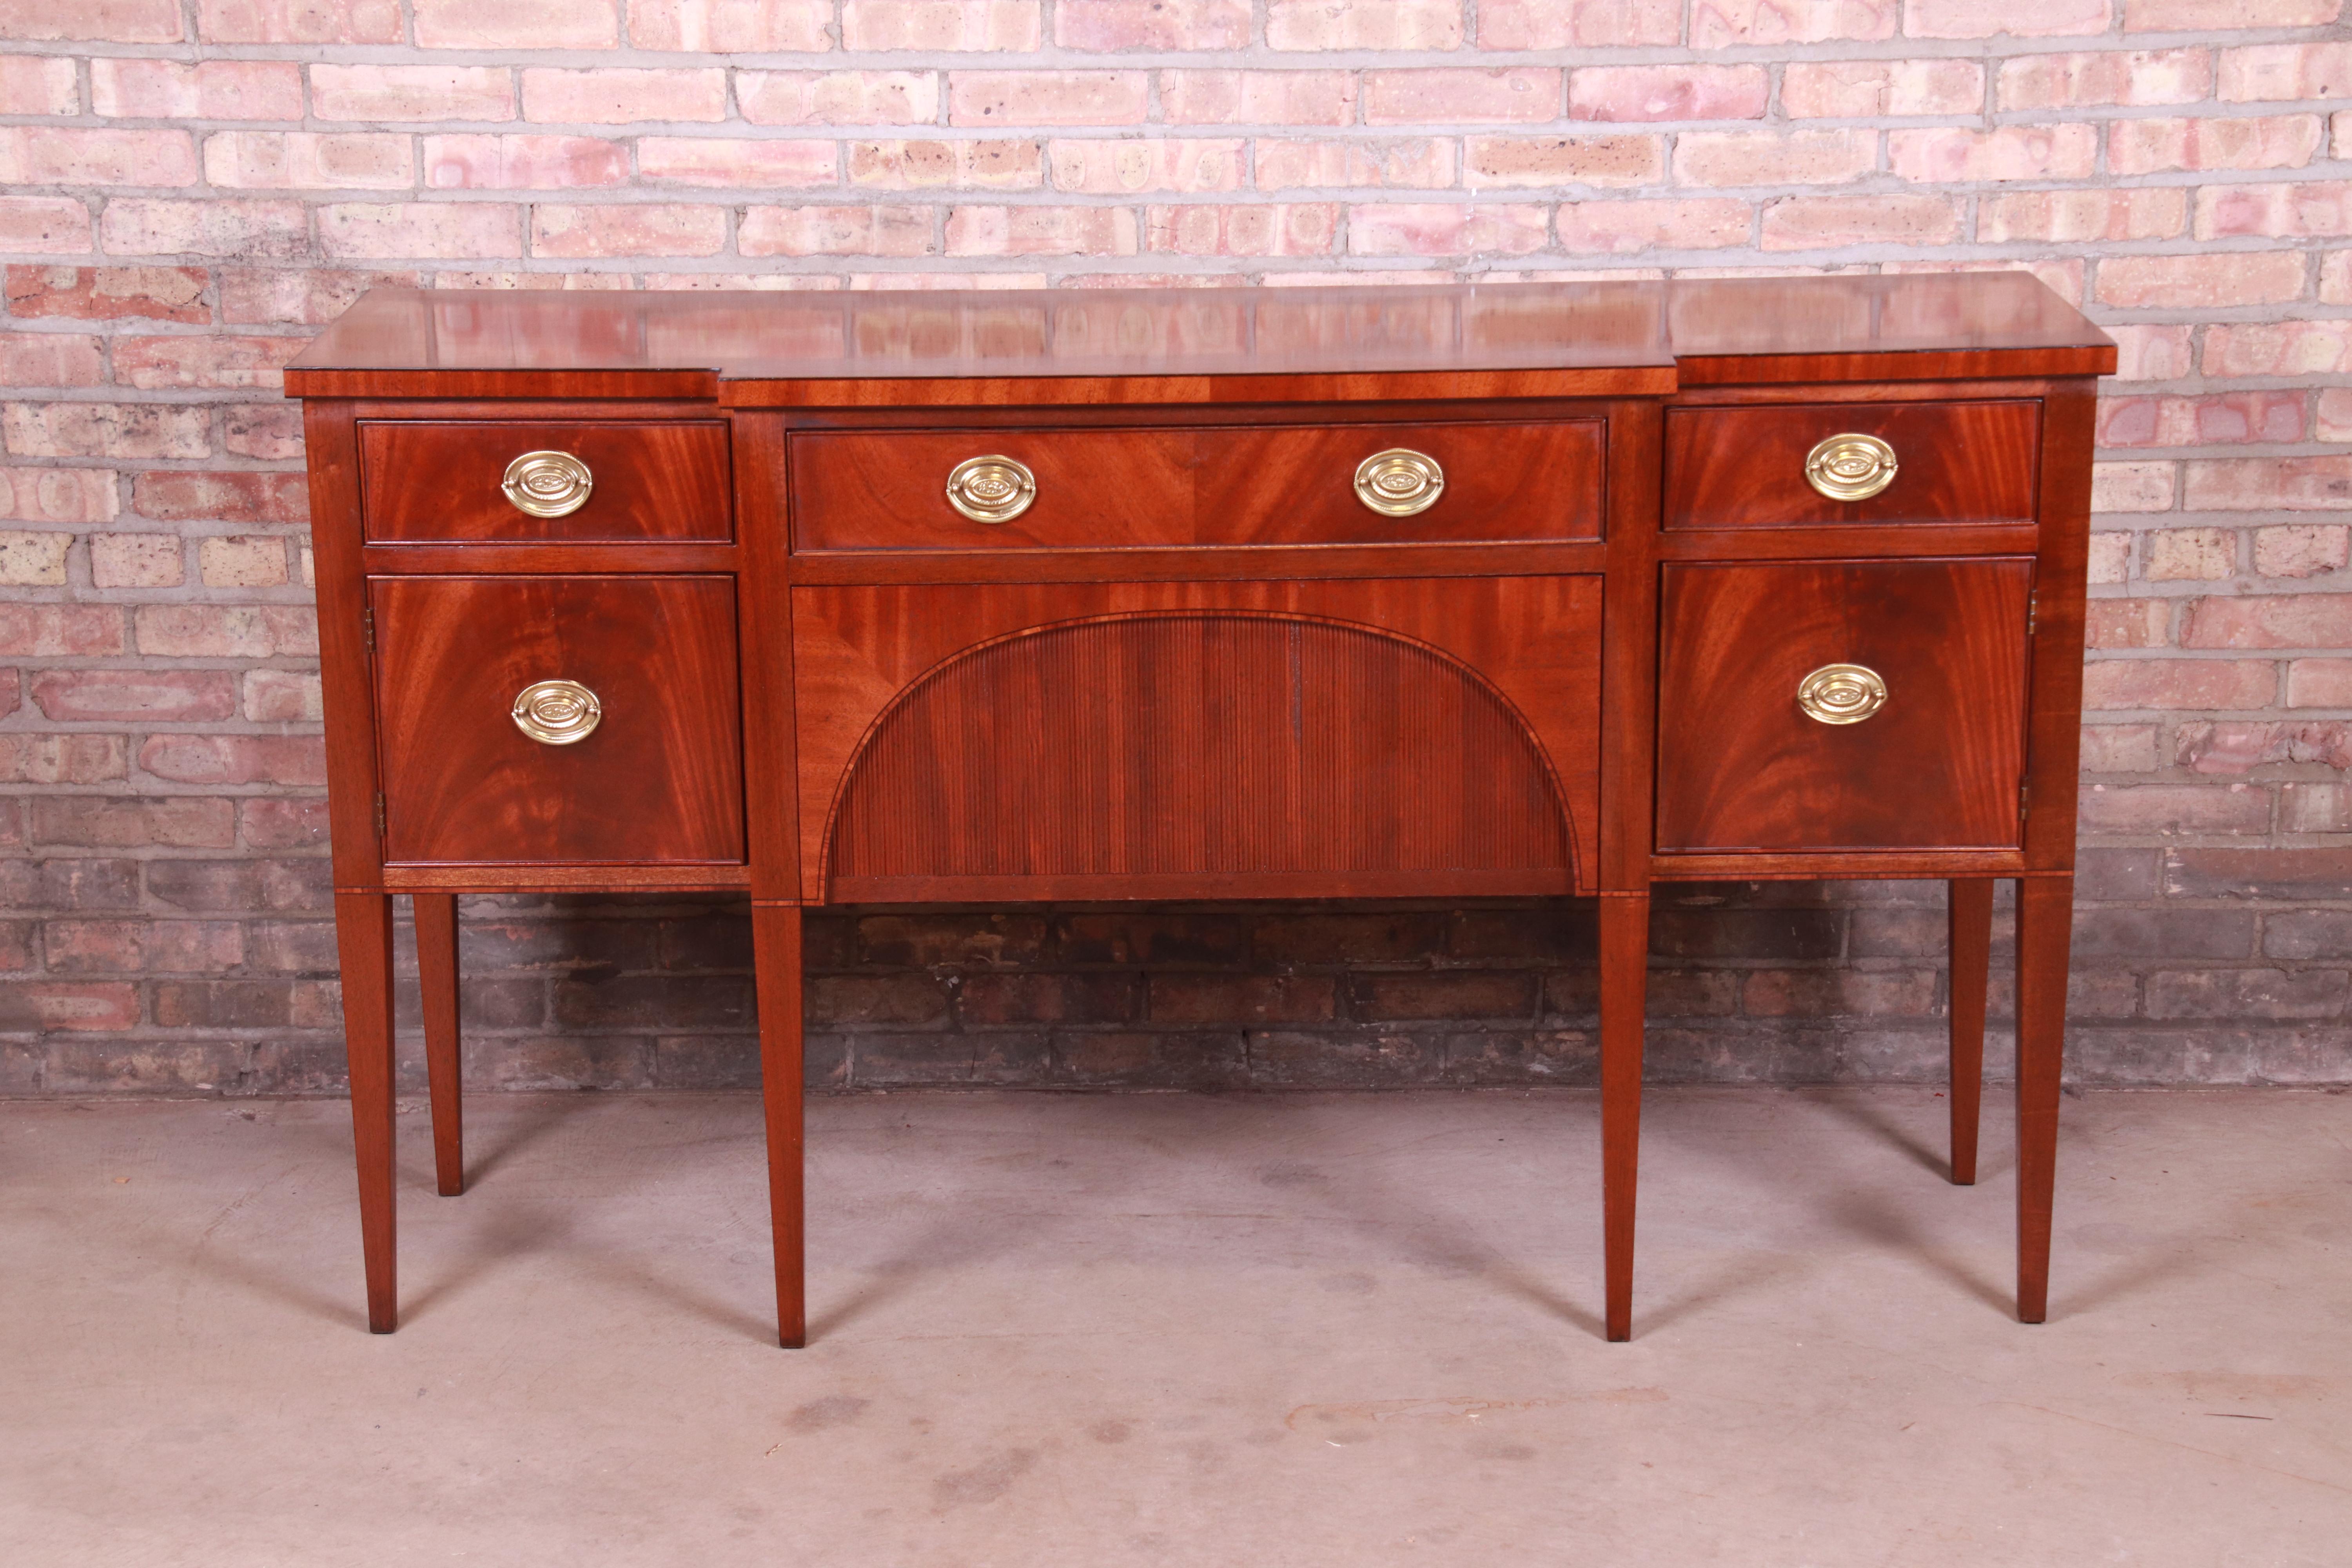 An exceptional Hepplewhite or Federal style sideboard, credenza, or buffet

By Baker Furniture 